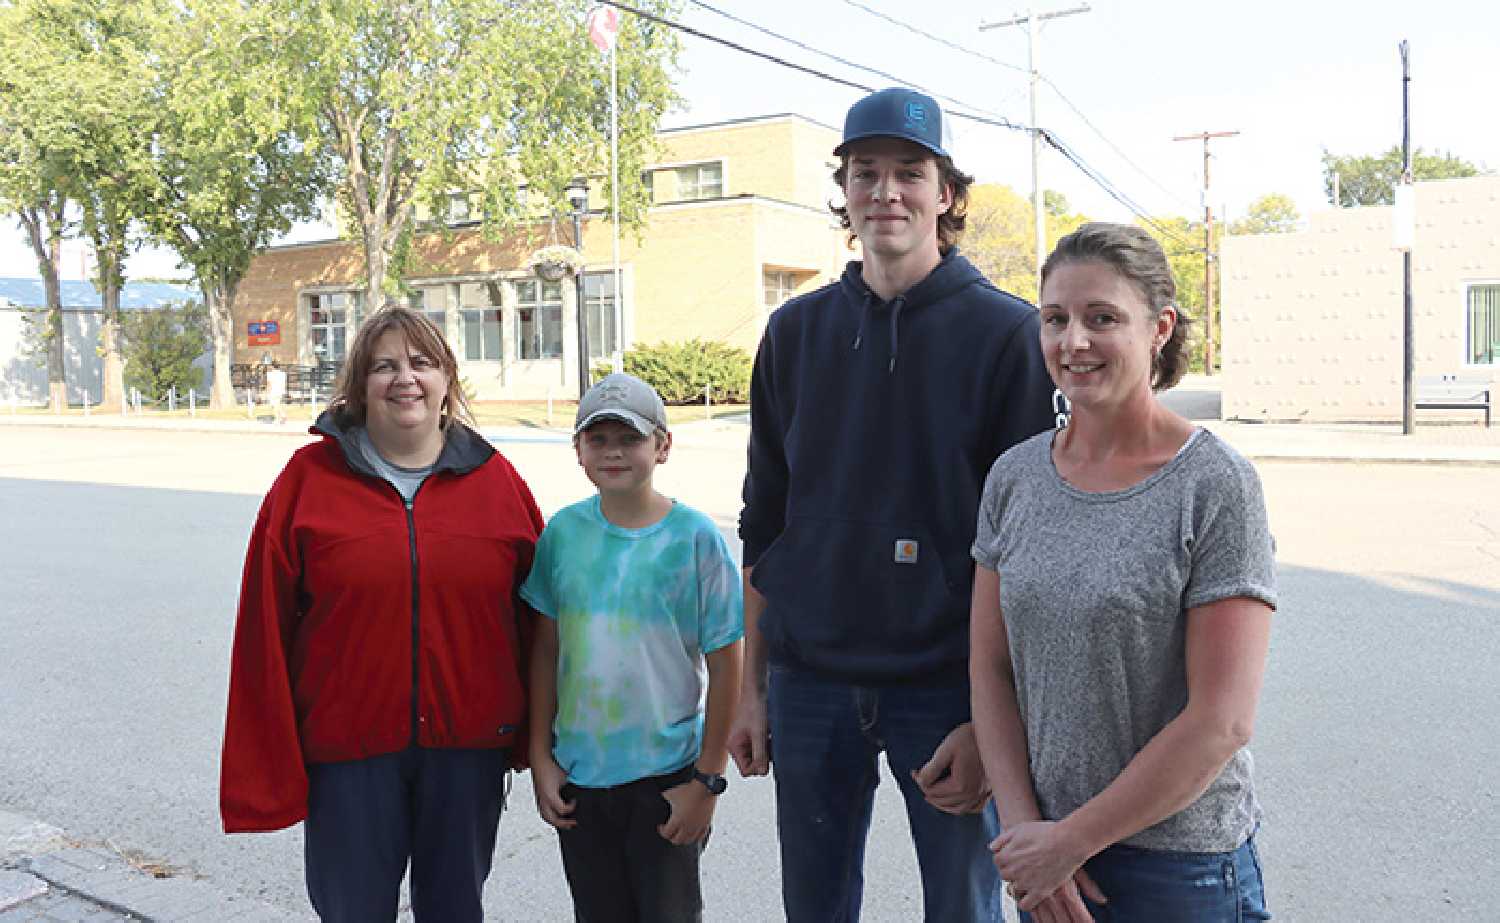 Moosomins 4-H Multi Club members (left) May and Lincoln Swanson, along with Kale and Trudi Holmstrom spoke about the groups interest for various program initiatives, such as sewing, public speaking, archery and more.